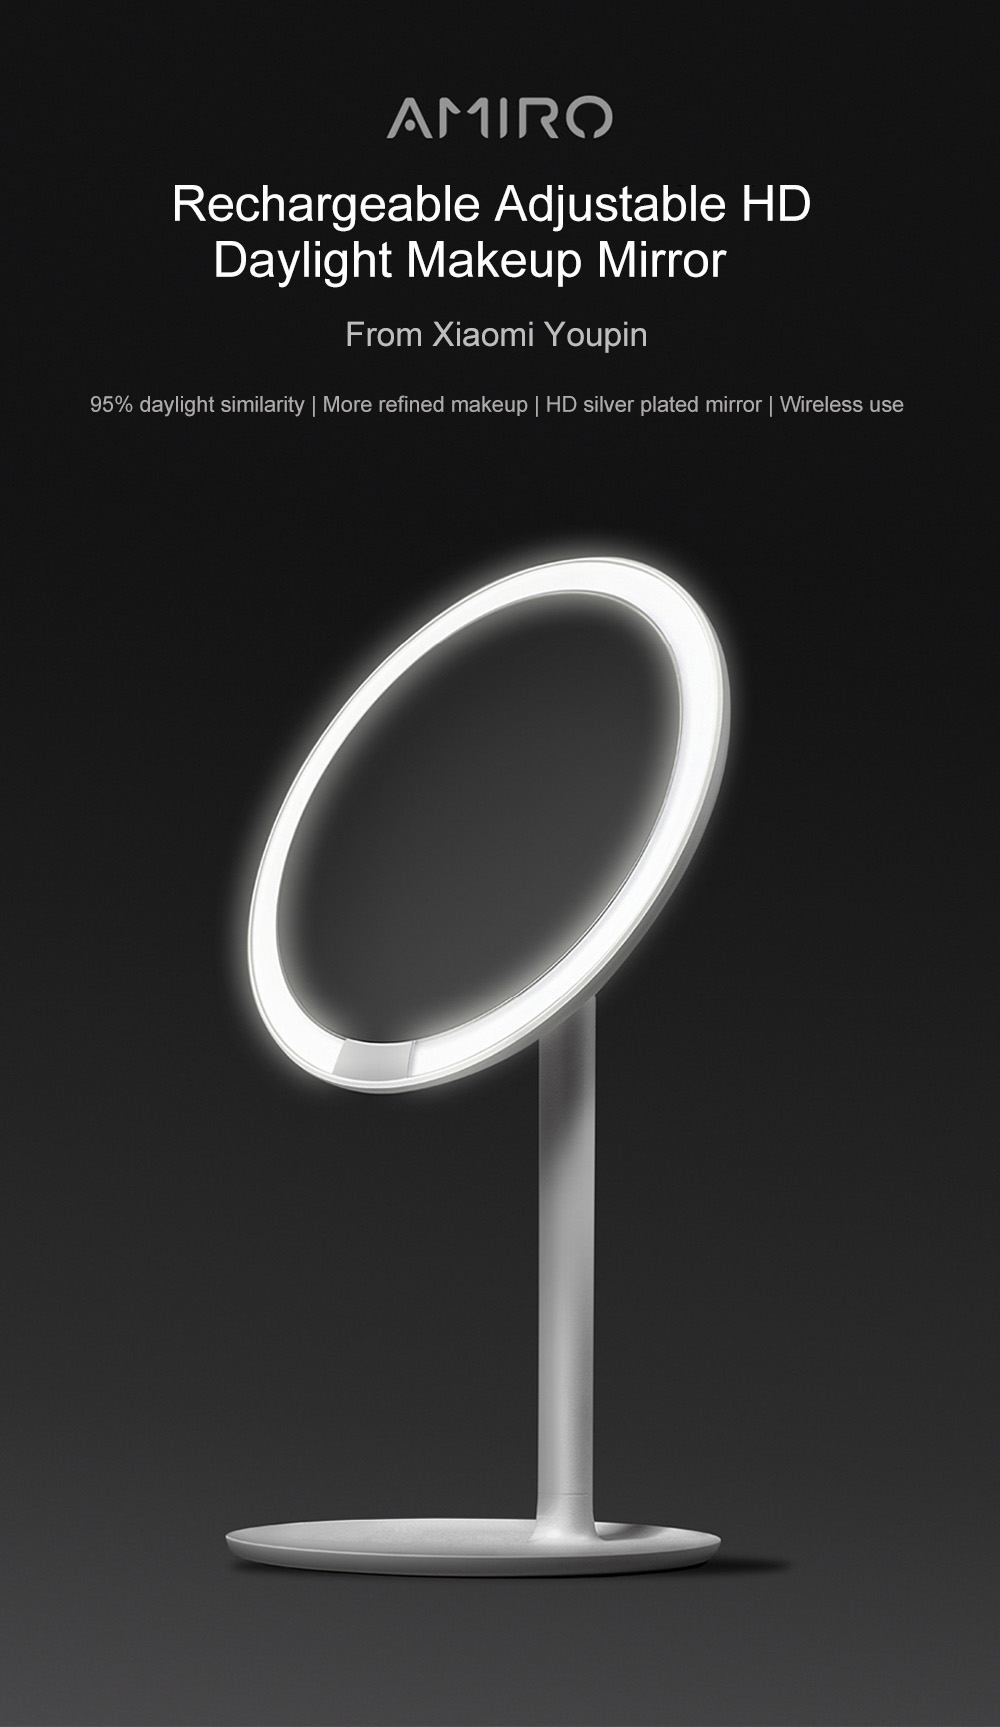 AML004 Rechargeable Brightness Adjustable LED HD Makeup Daylight Mirror from Xiaomi Youpin